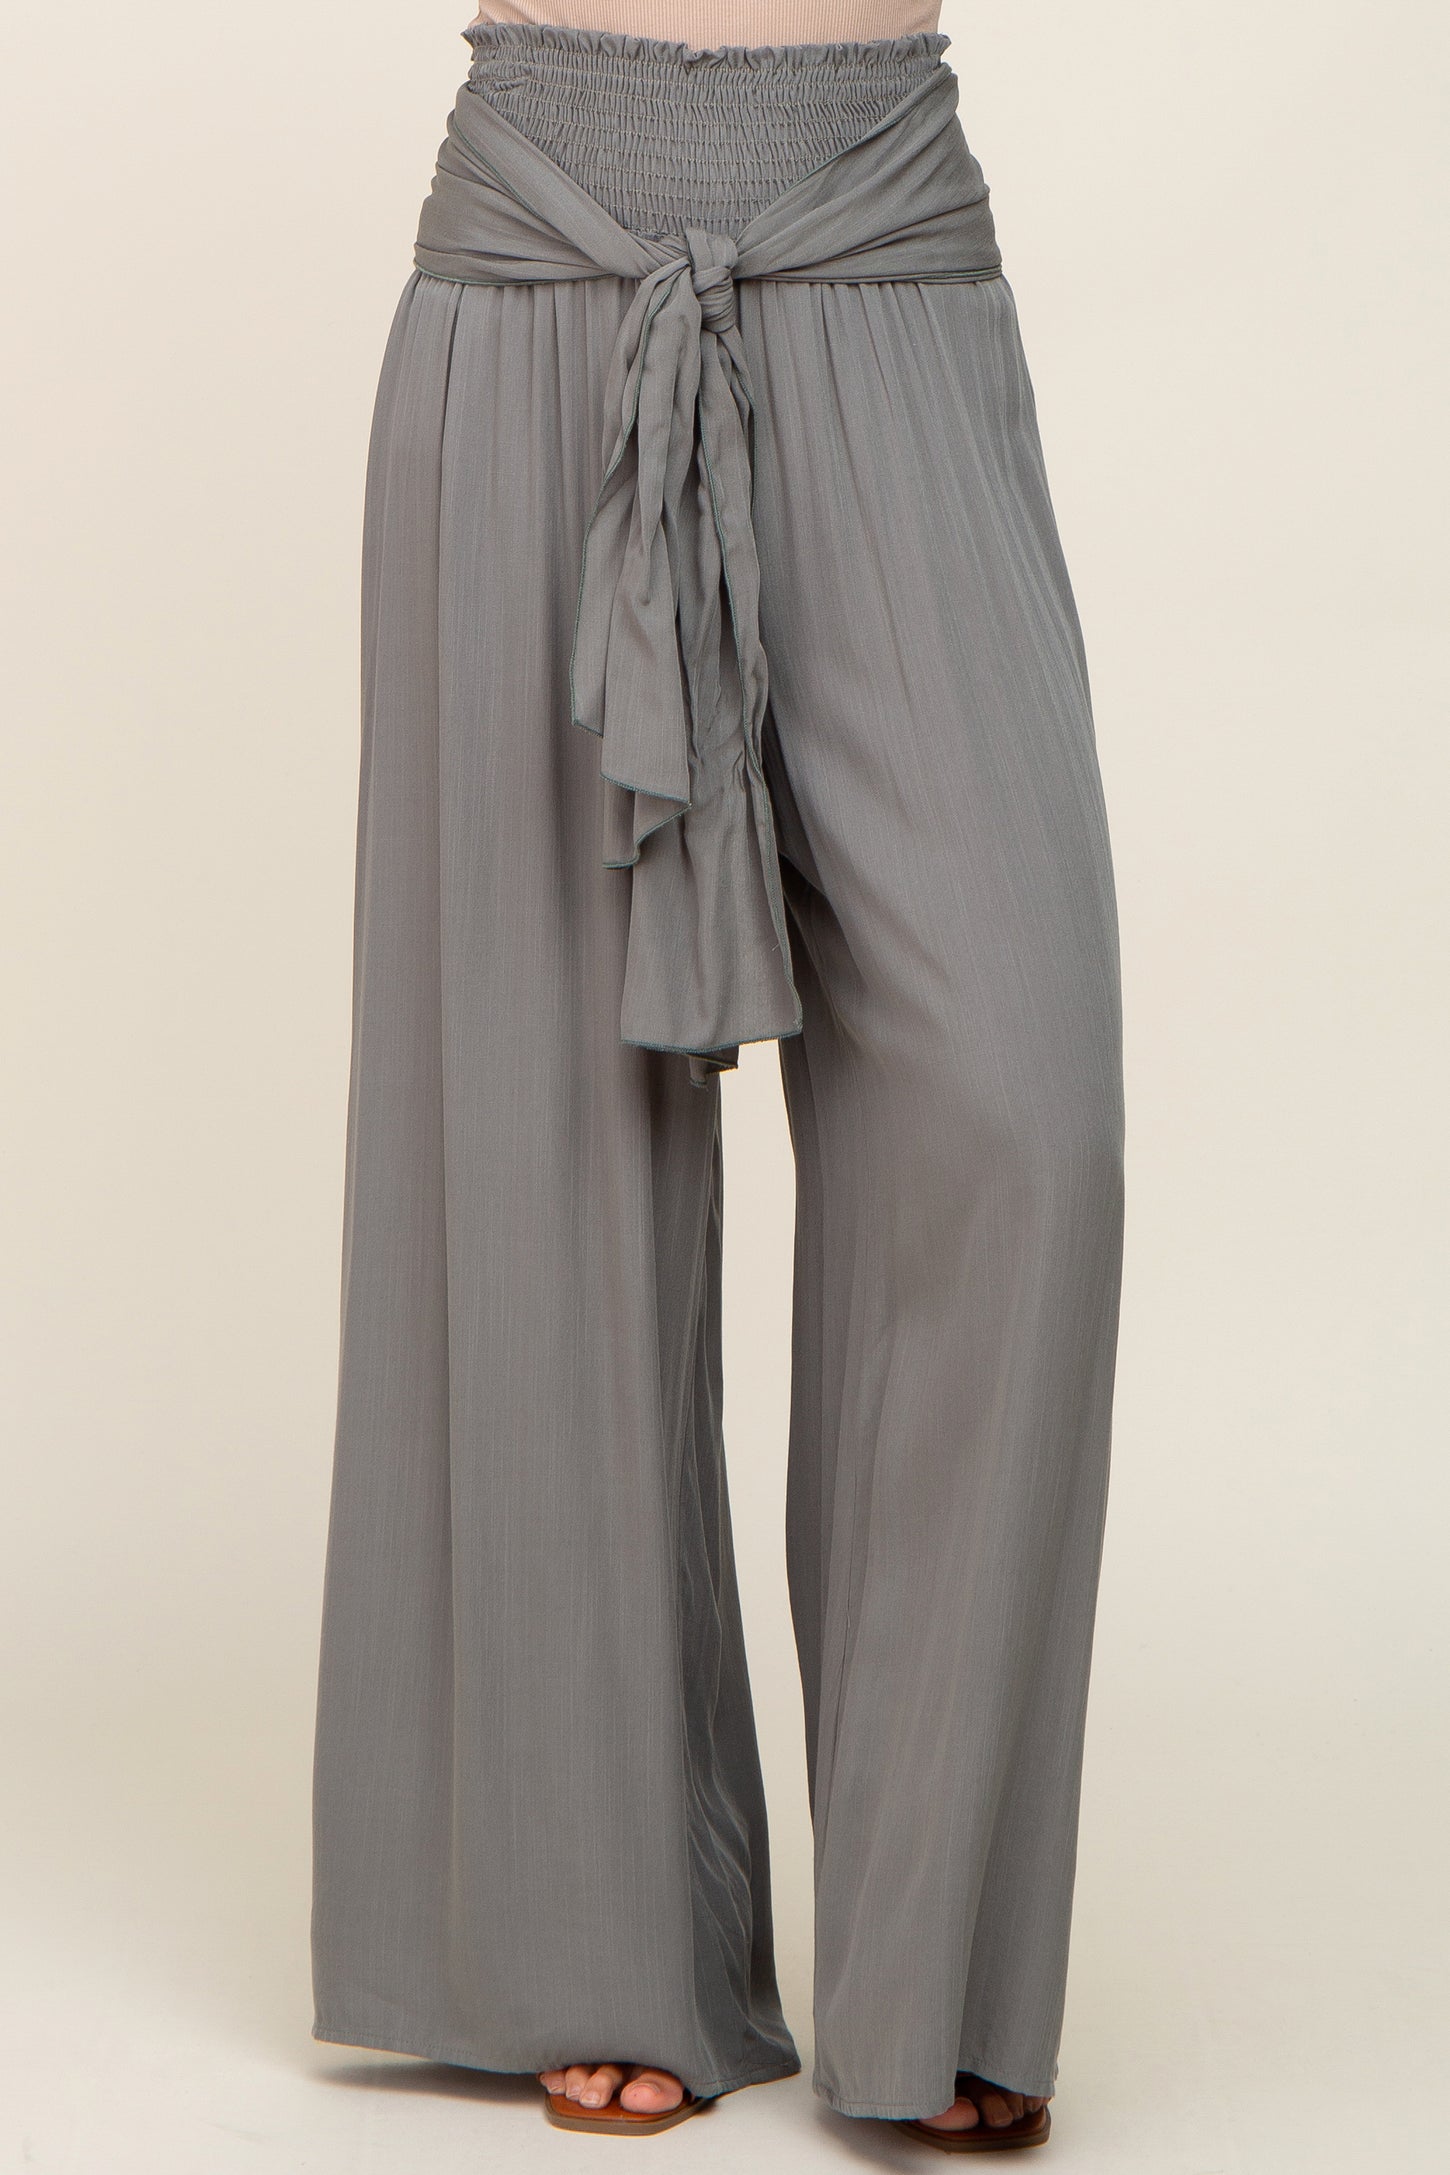 Olive High Waist Tie Front Wide Pants